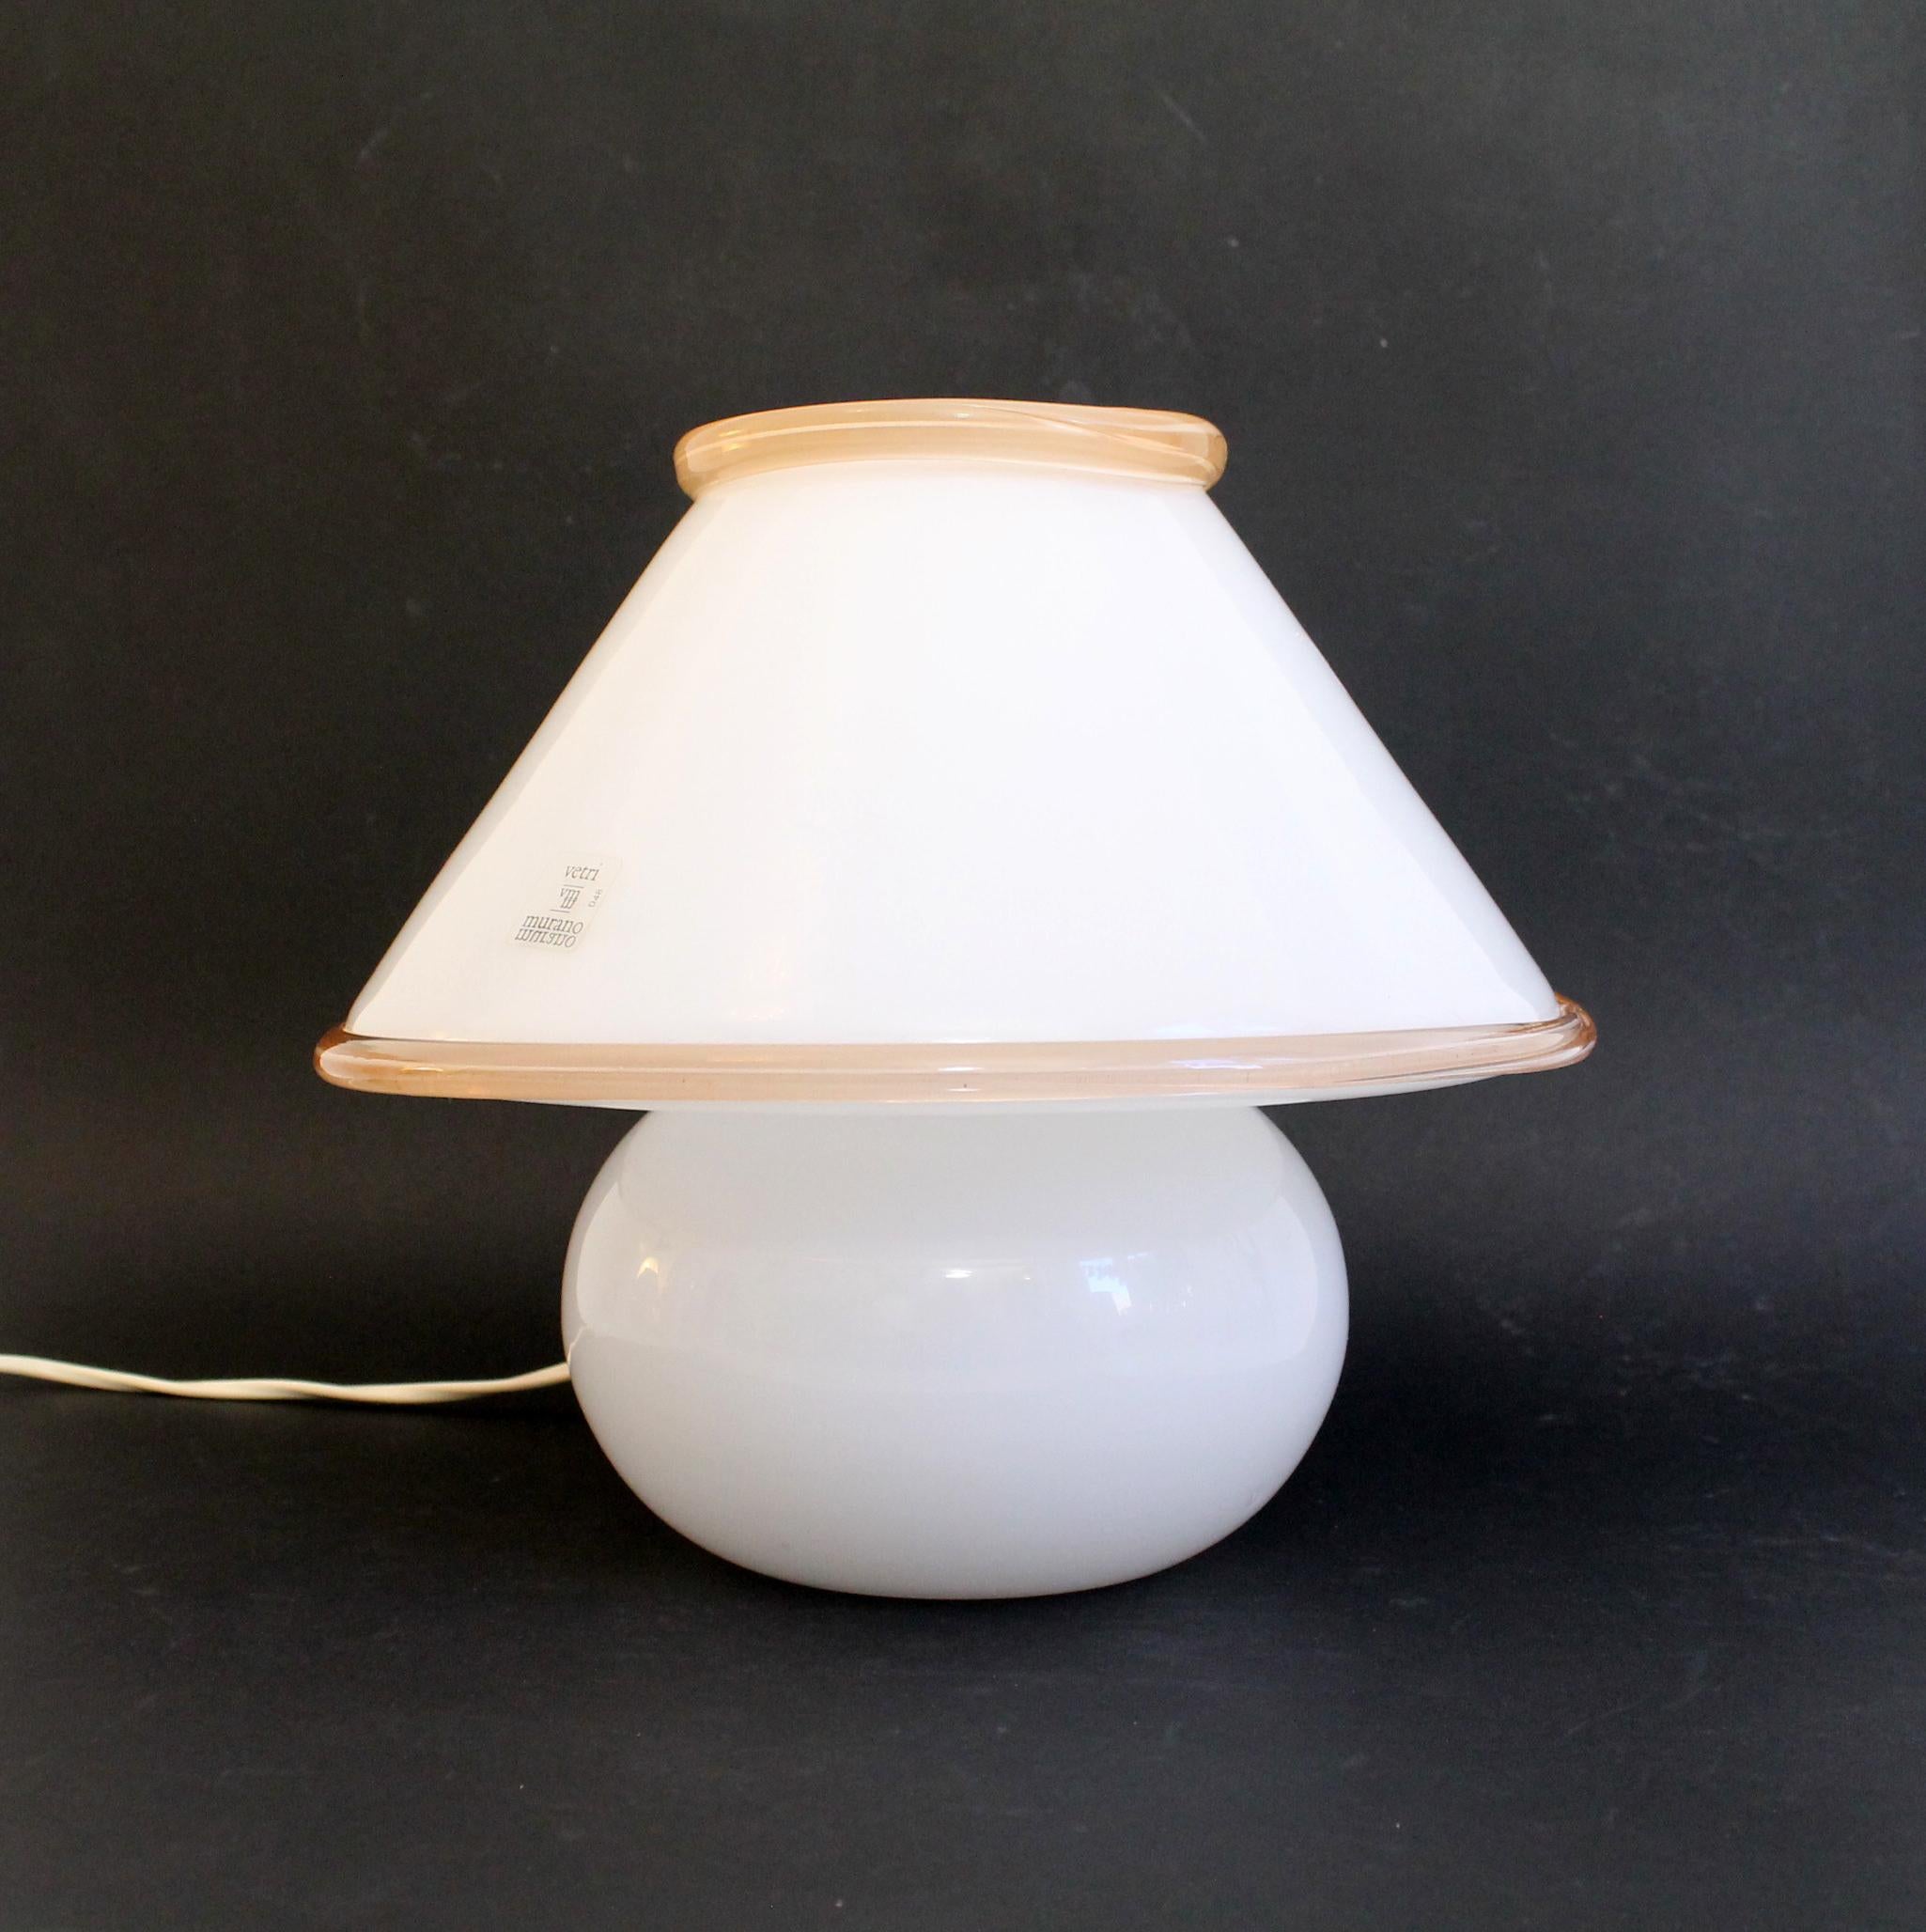 Murano vintage mushroom table/desk lamp by LEUCOS. White opaline glass with light pink glass mass insertions
The original sticker (Murano manufacturer number #0048 LEUCOS) is still on it!
1970s original hand blown glass
Technique: made of a